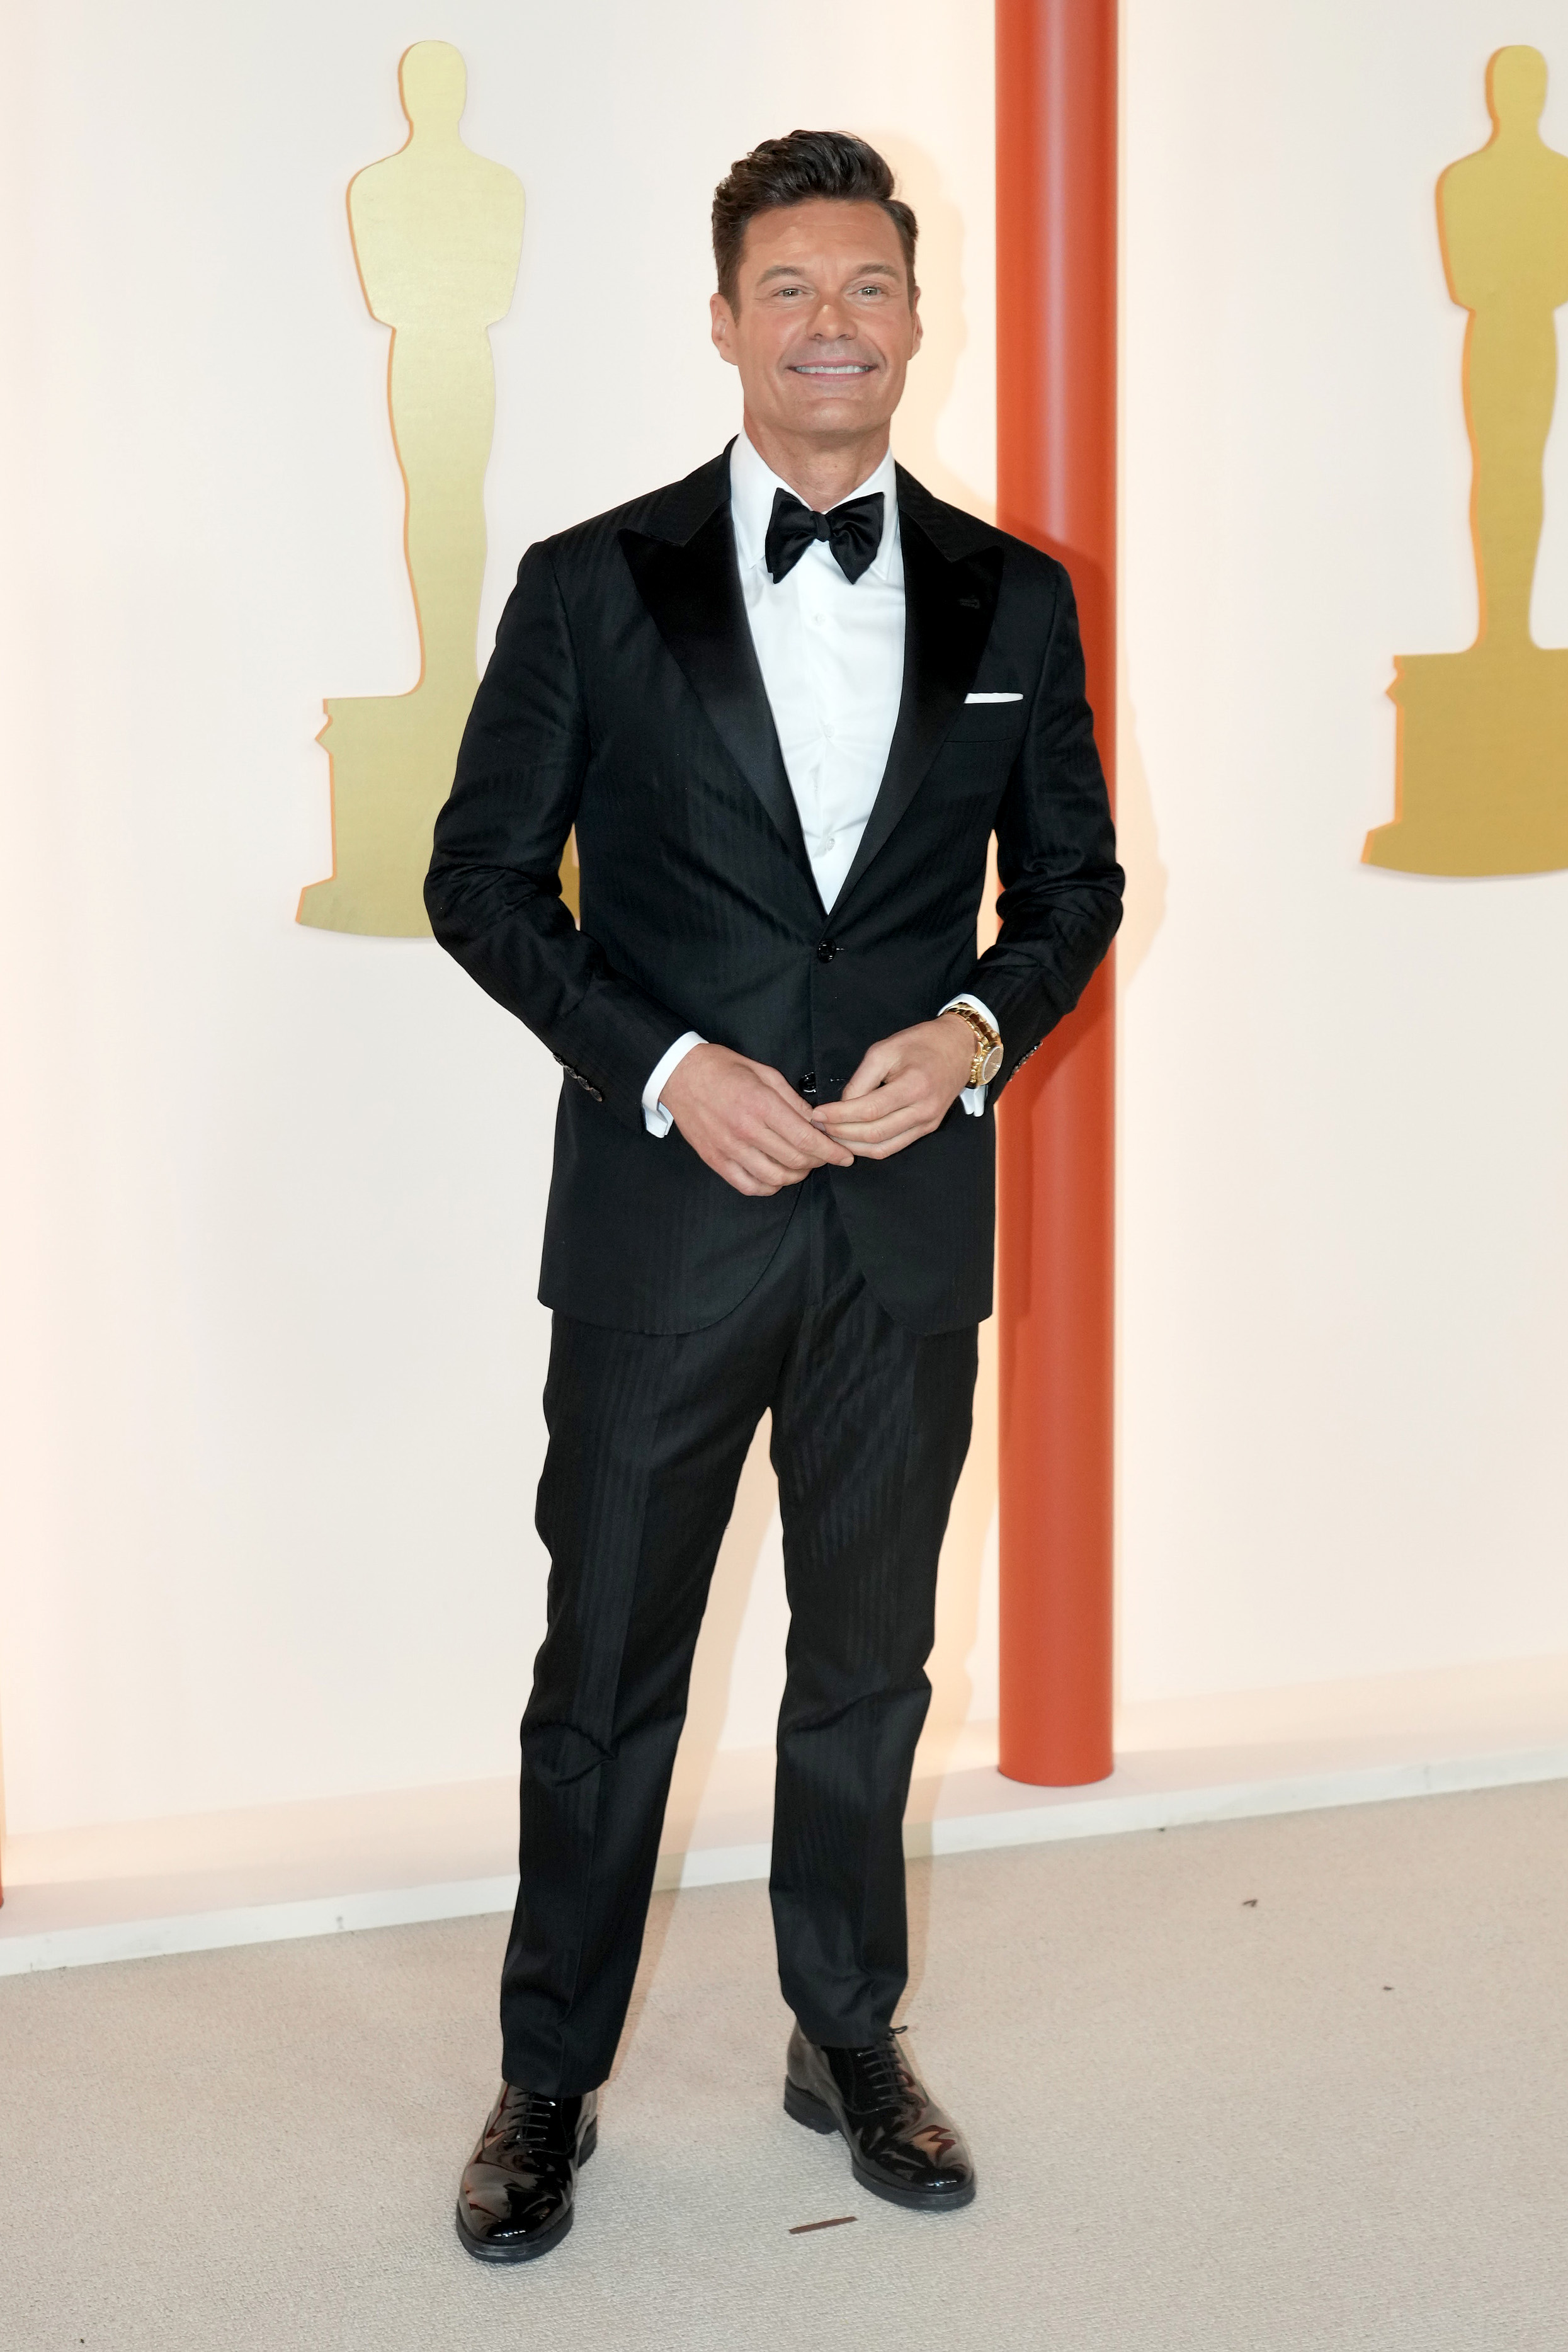 Ryan Seacrest attends the 95th Annual Academy Awards on March 12, 2023, in Hollywood, California. | Source: Getty Images